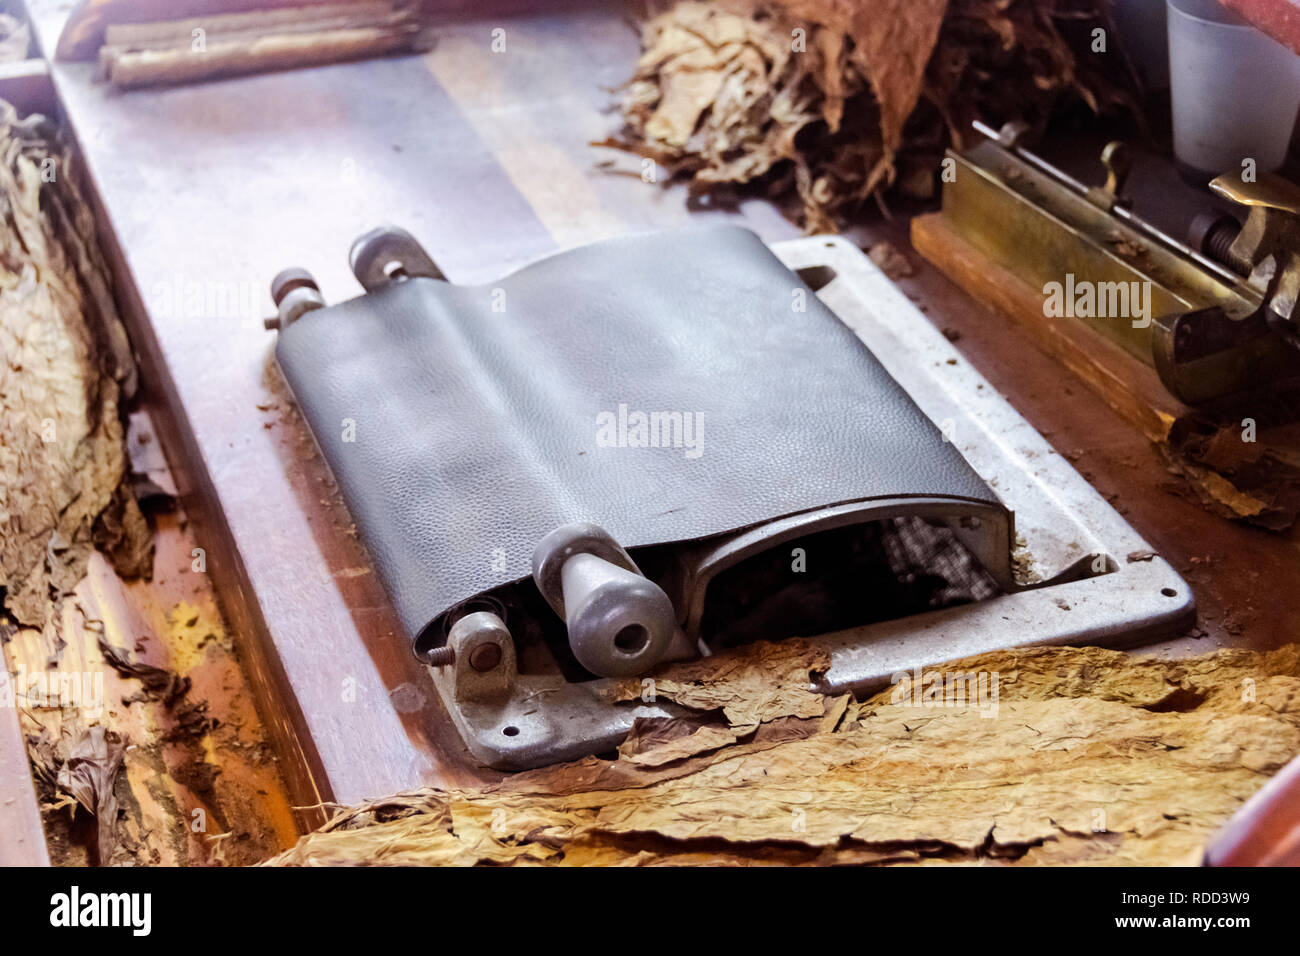 A cigar rolling machine Inside a cigar factory. Traditional manufacture of cigars at the tobacco factory. Making a cigar from tobacco leaves Stock Photo